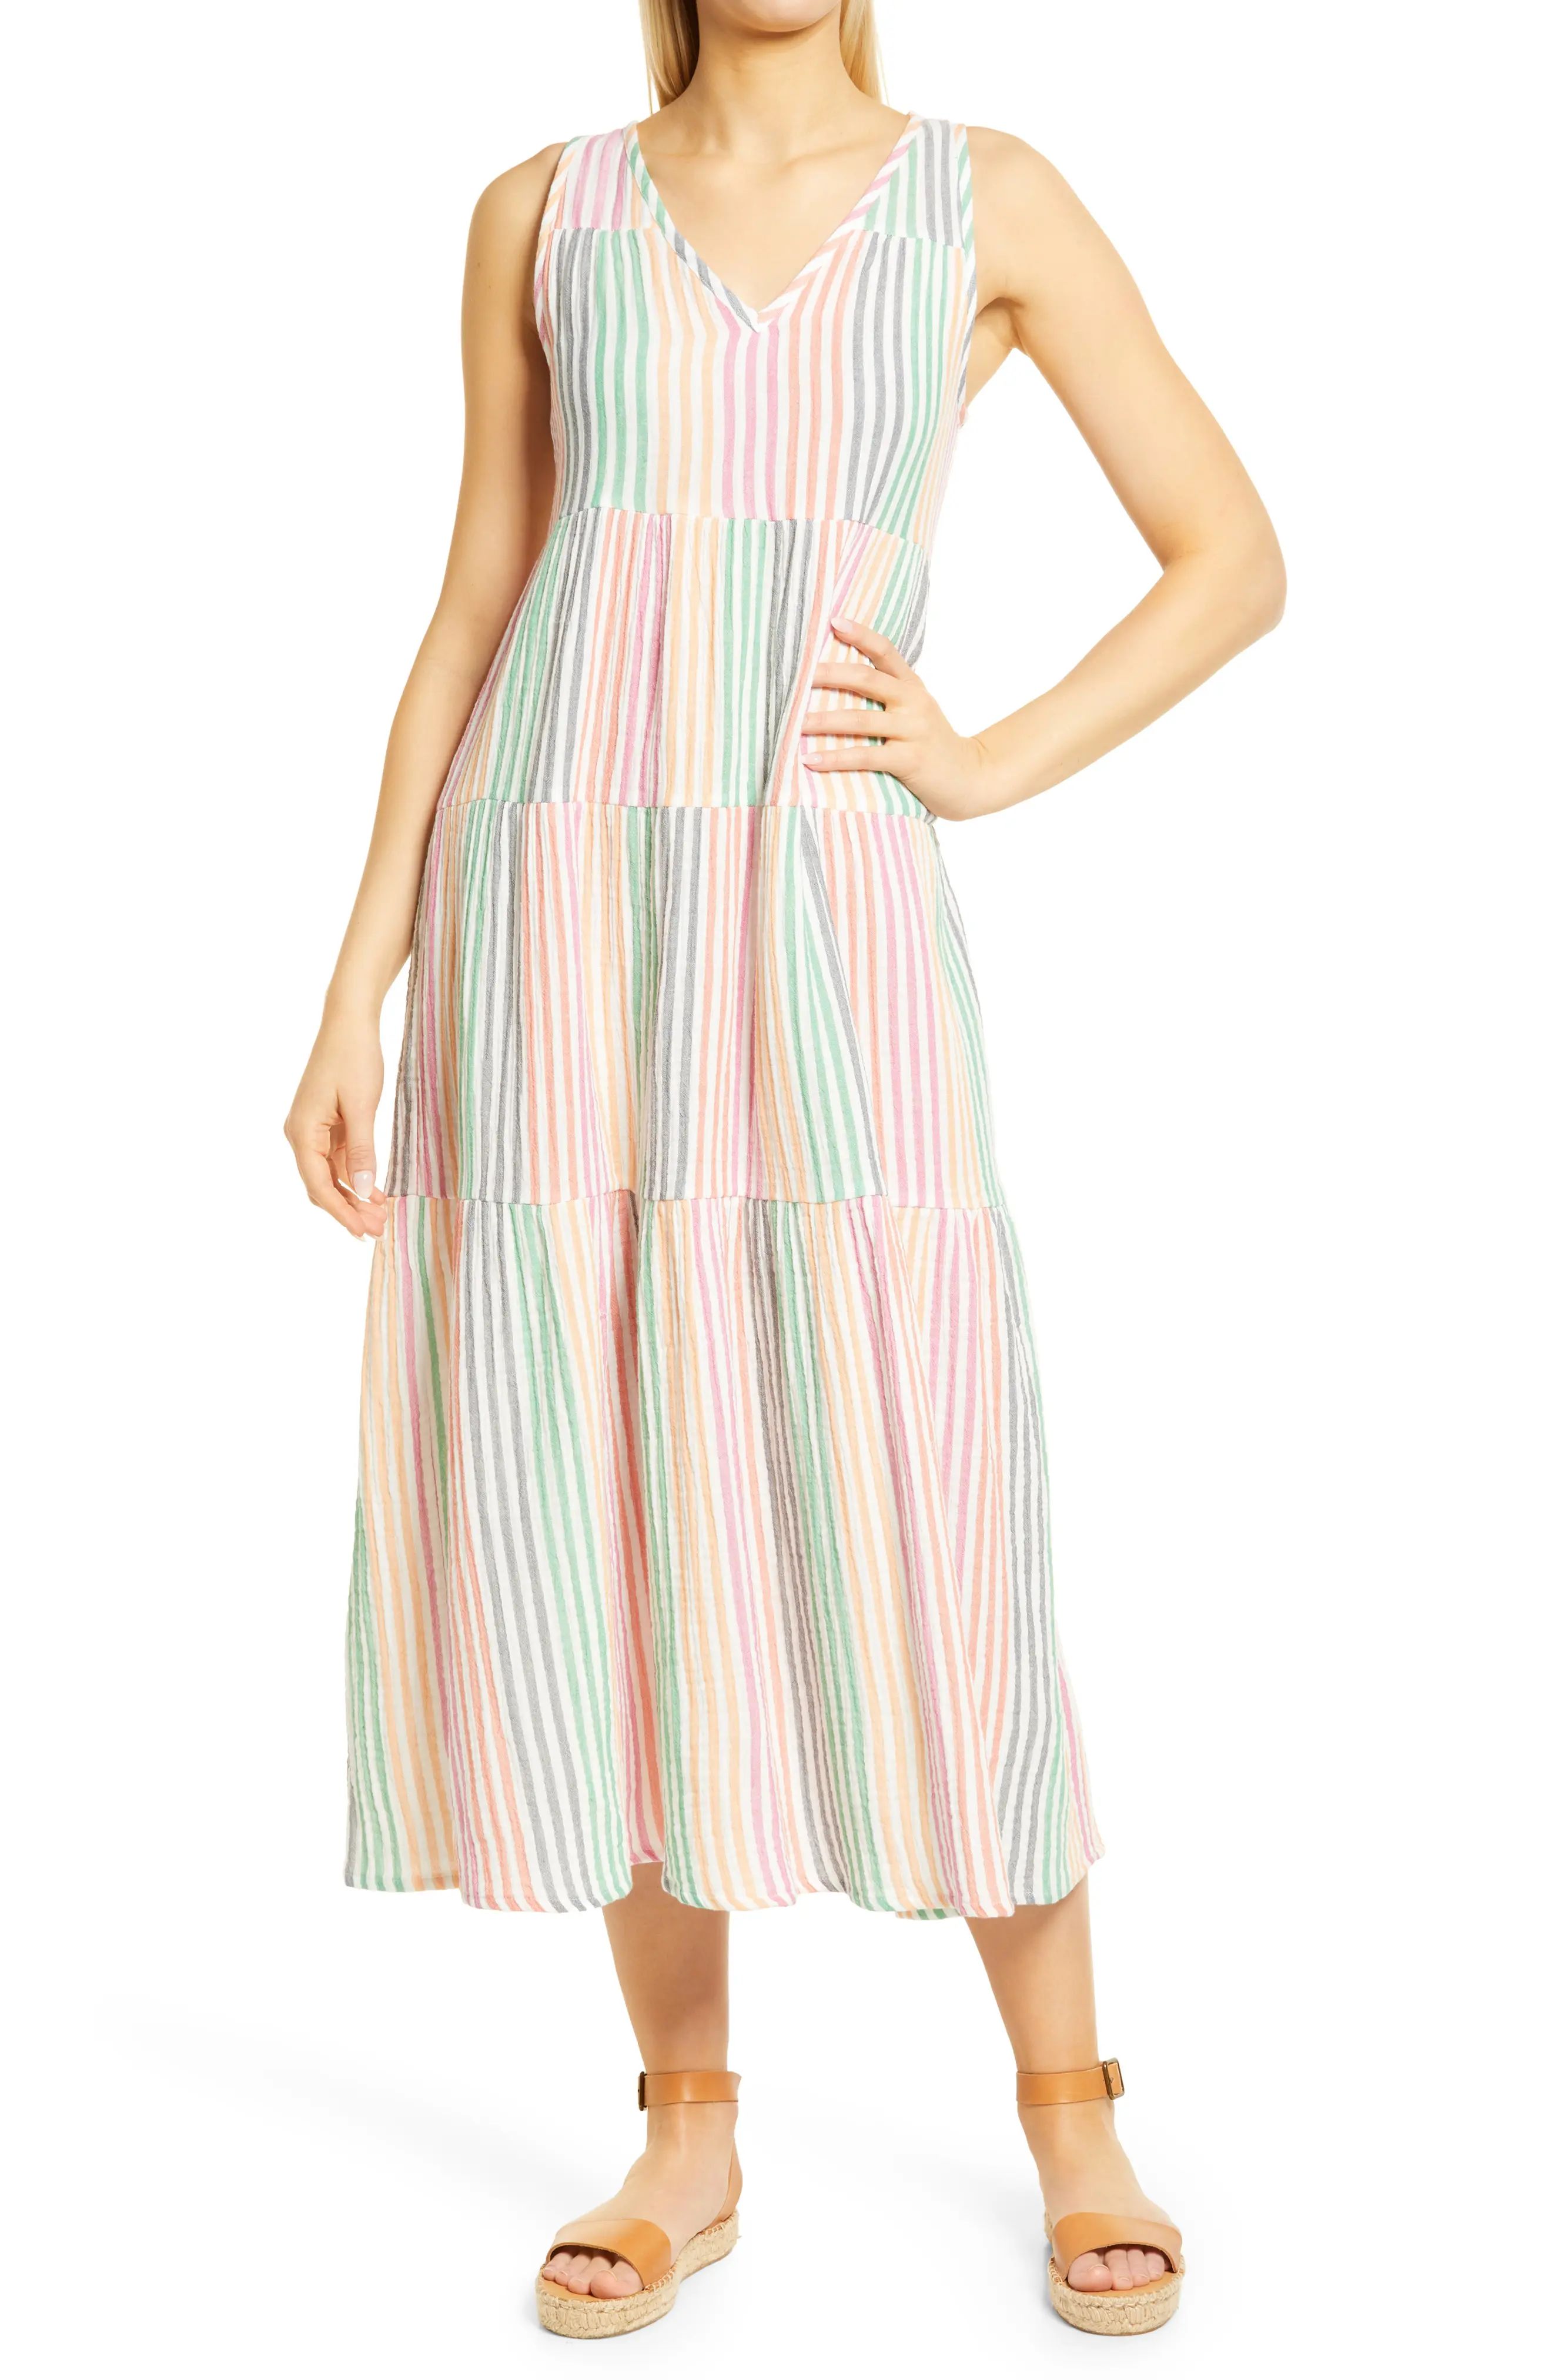 Marine Layer Corinne Stripe Tiered Maxi Dress in Rainbow Stripe at Nordstrom, Size Small | Nordstrom